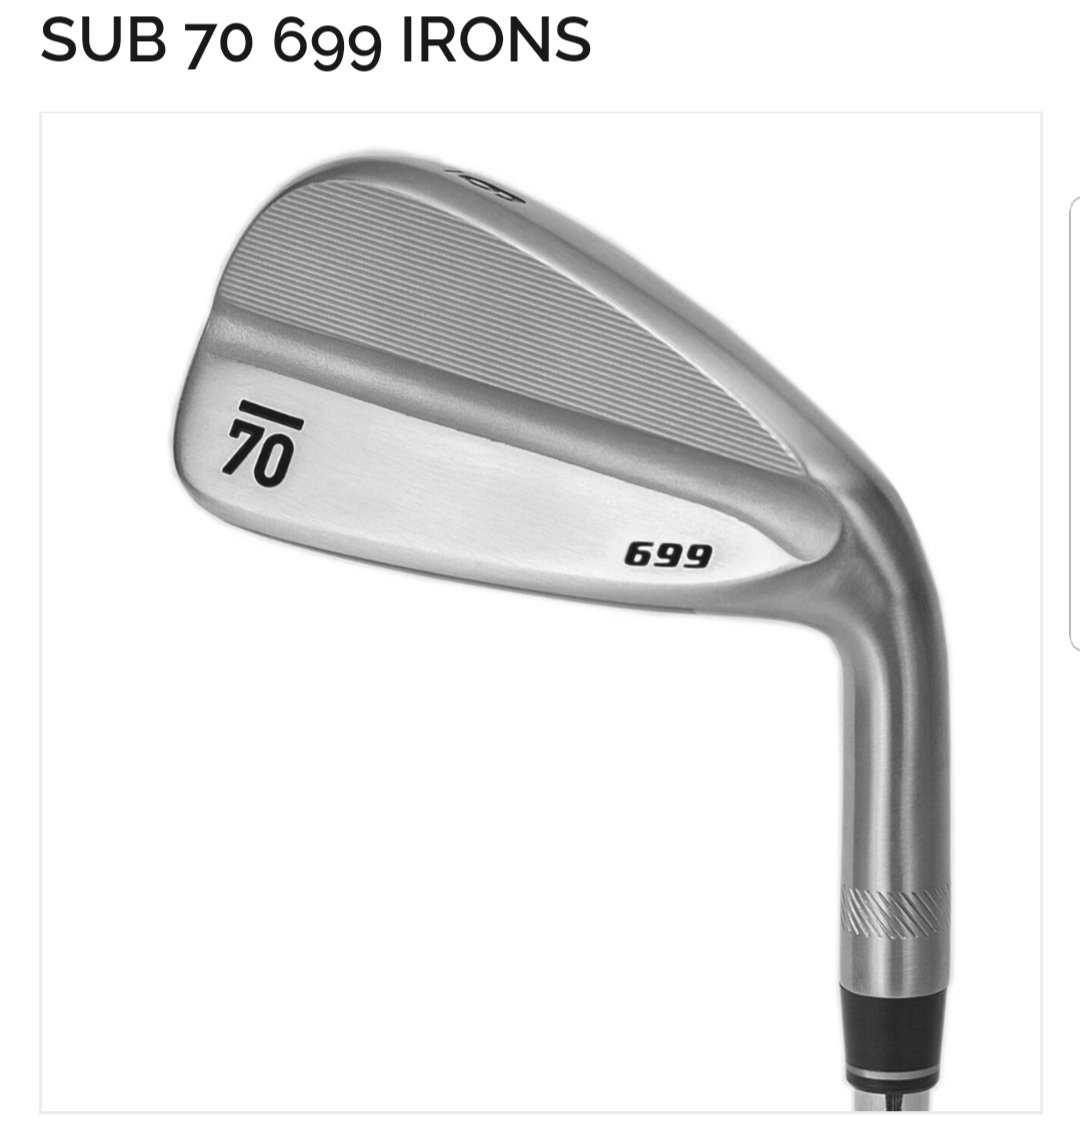 Want a chance at brand new set of clubs???? Thanks to @Sub70 its your lucky day. RT and follow @Sub70 and have a chance to win a set of their 699's. Winner picked randomly on Friday